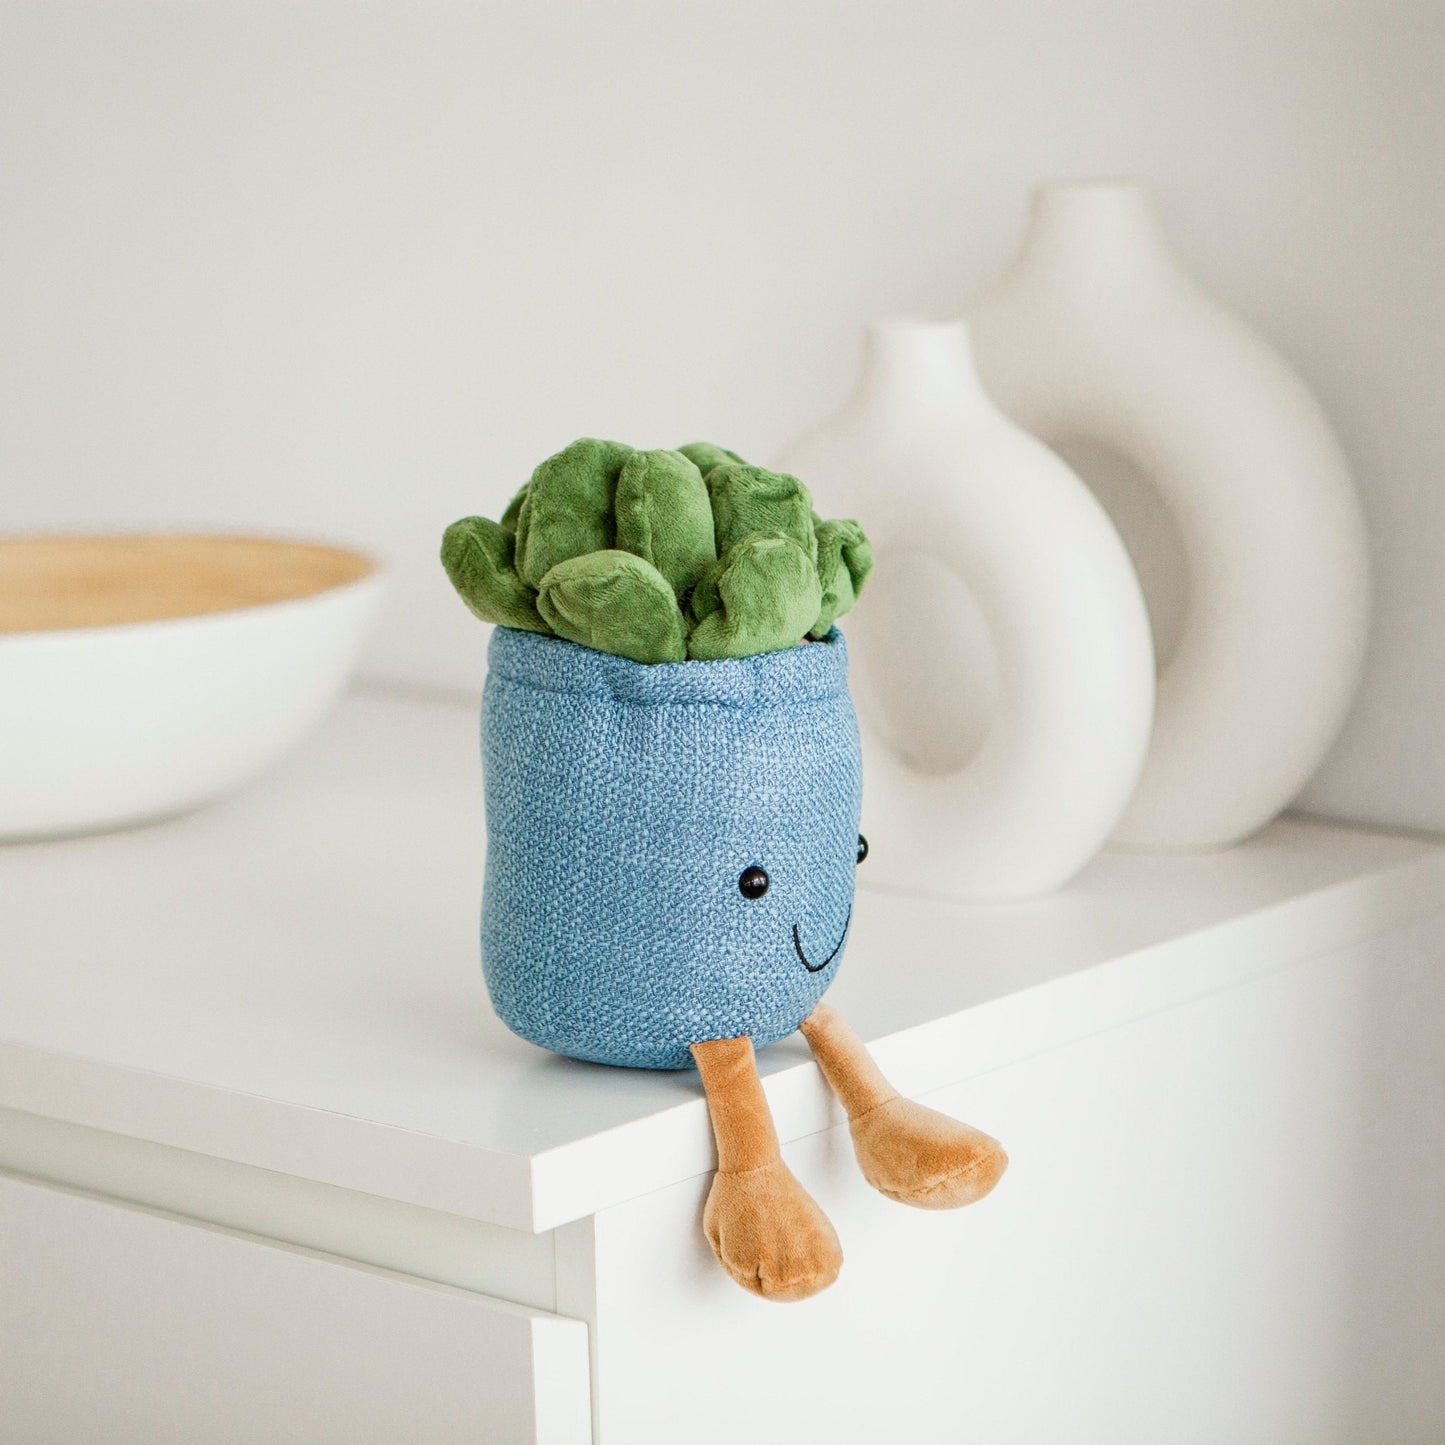 Silly Succulent Plushie - Sunny Succulents